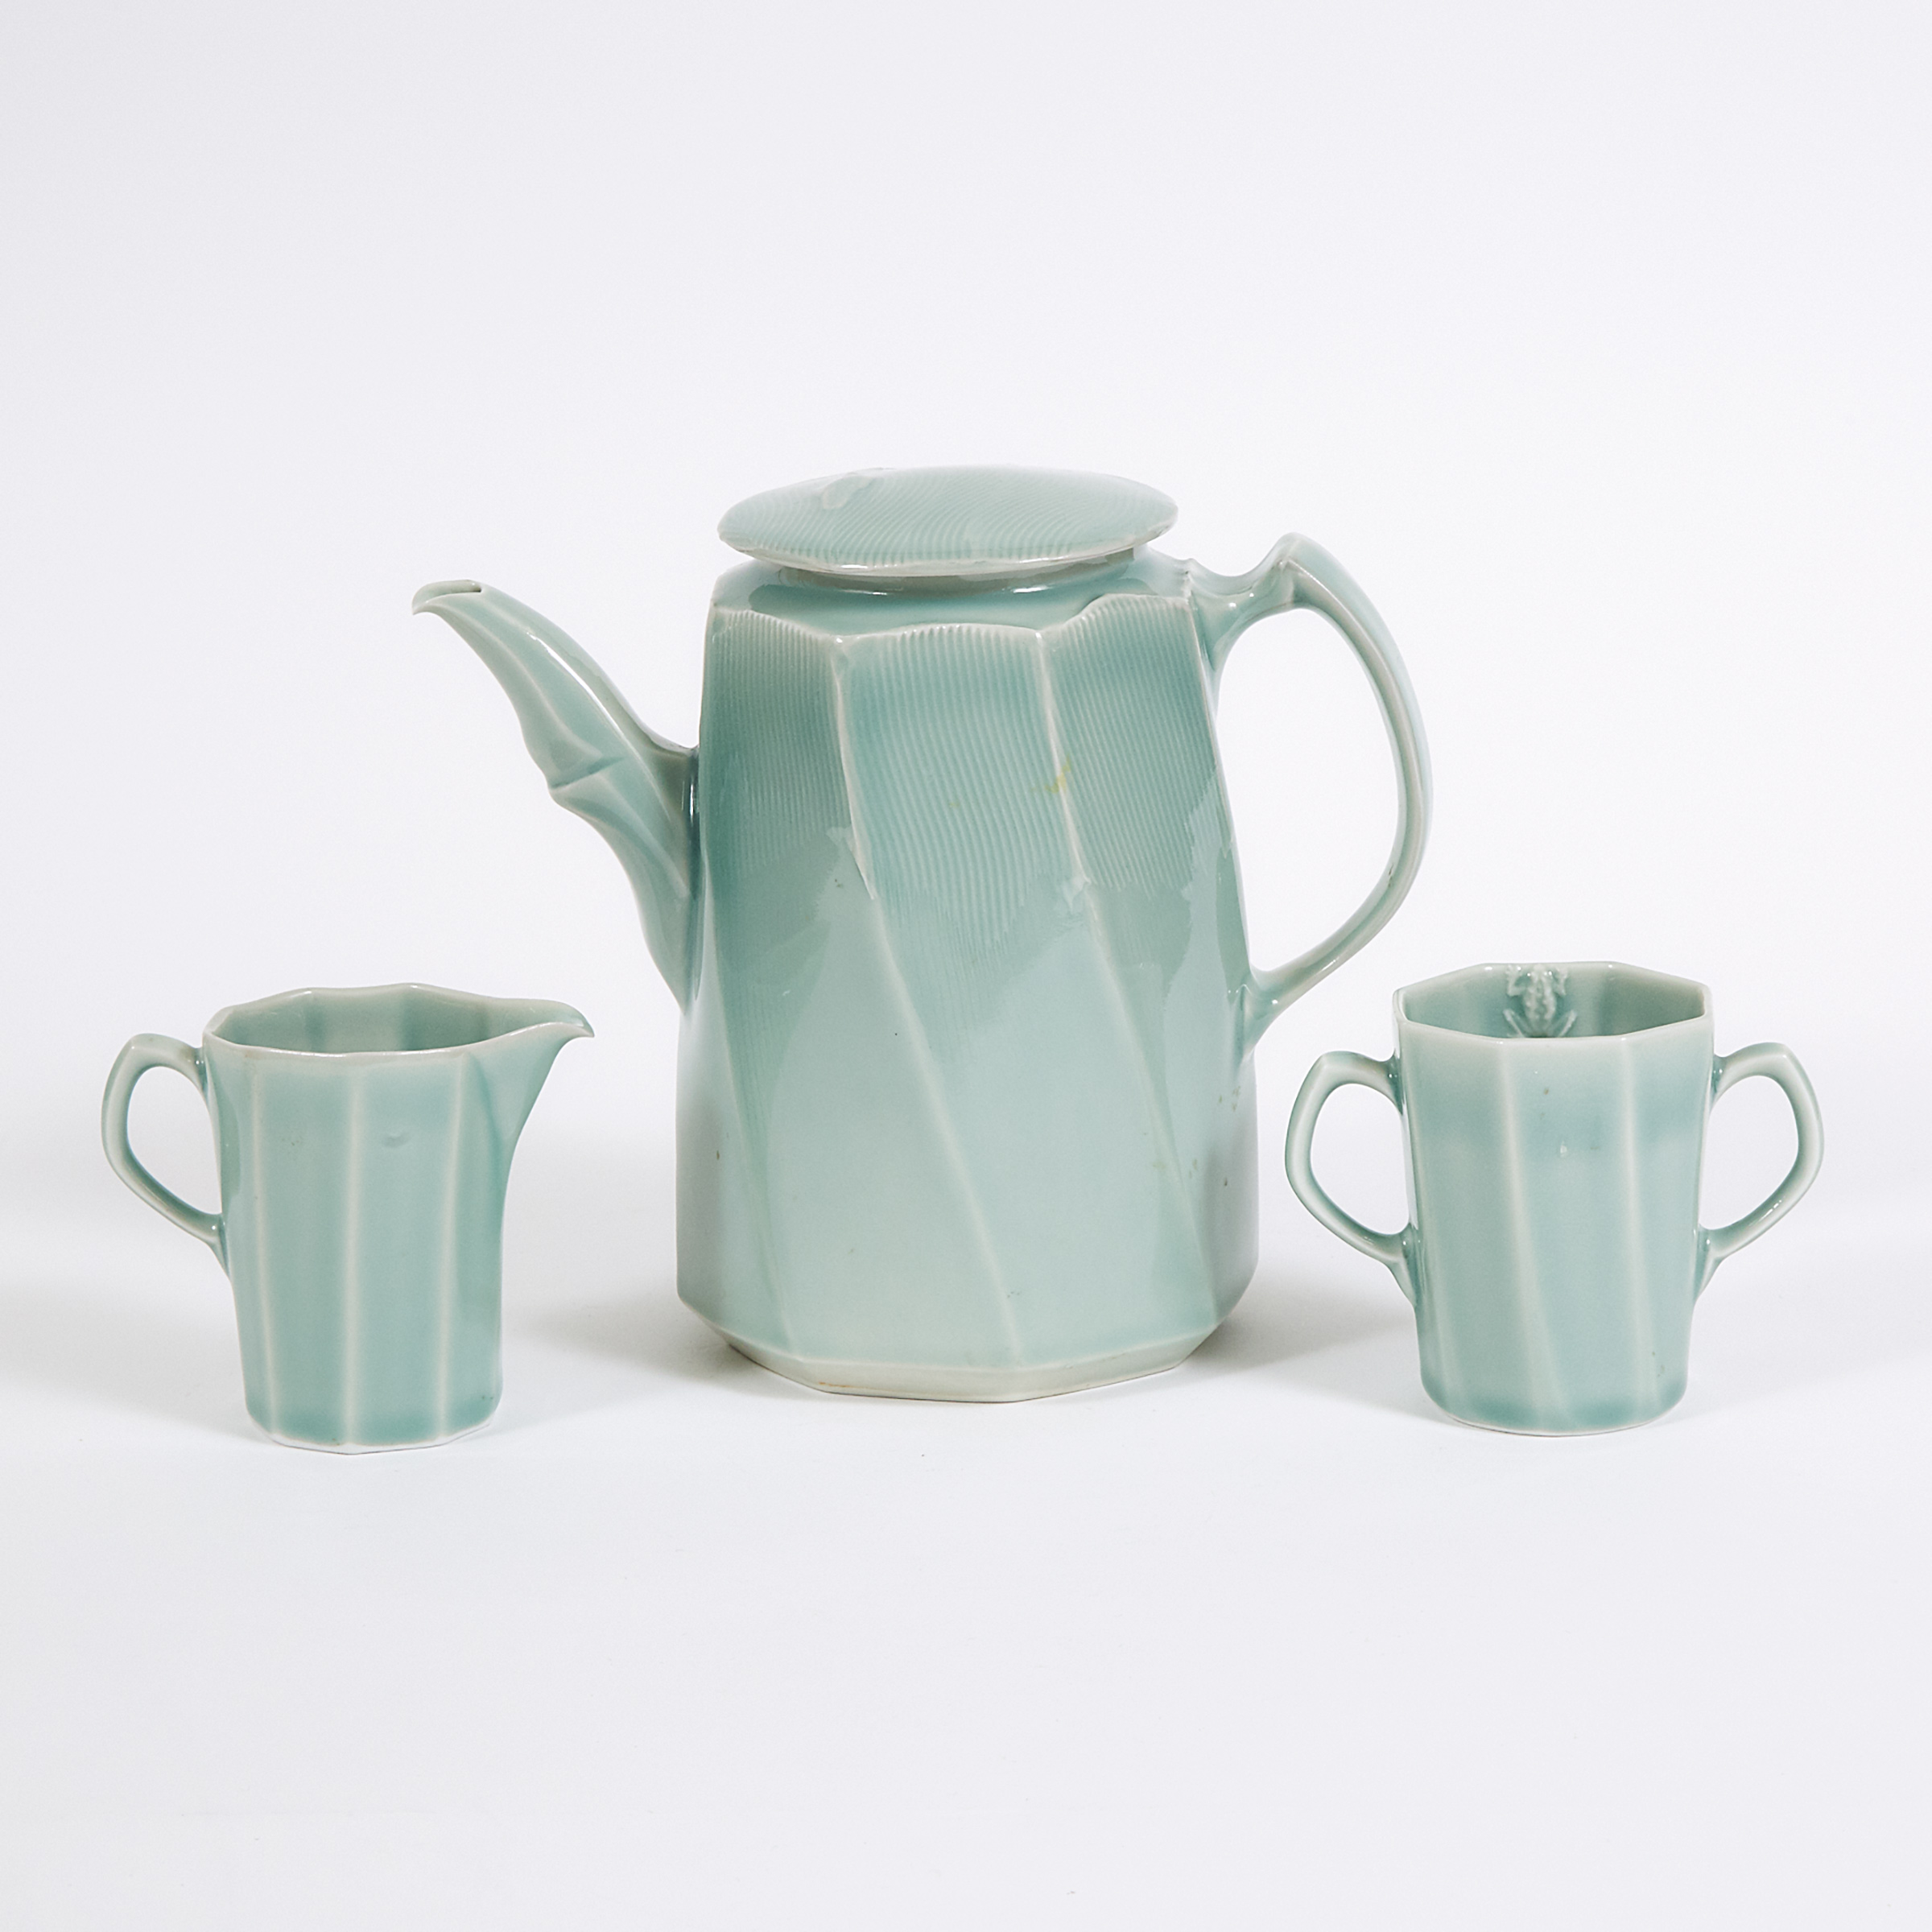 Harlan House (Canadian, b.1943), Celadon Glazed and Moulded Three-Piece Tea Set, 1988